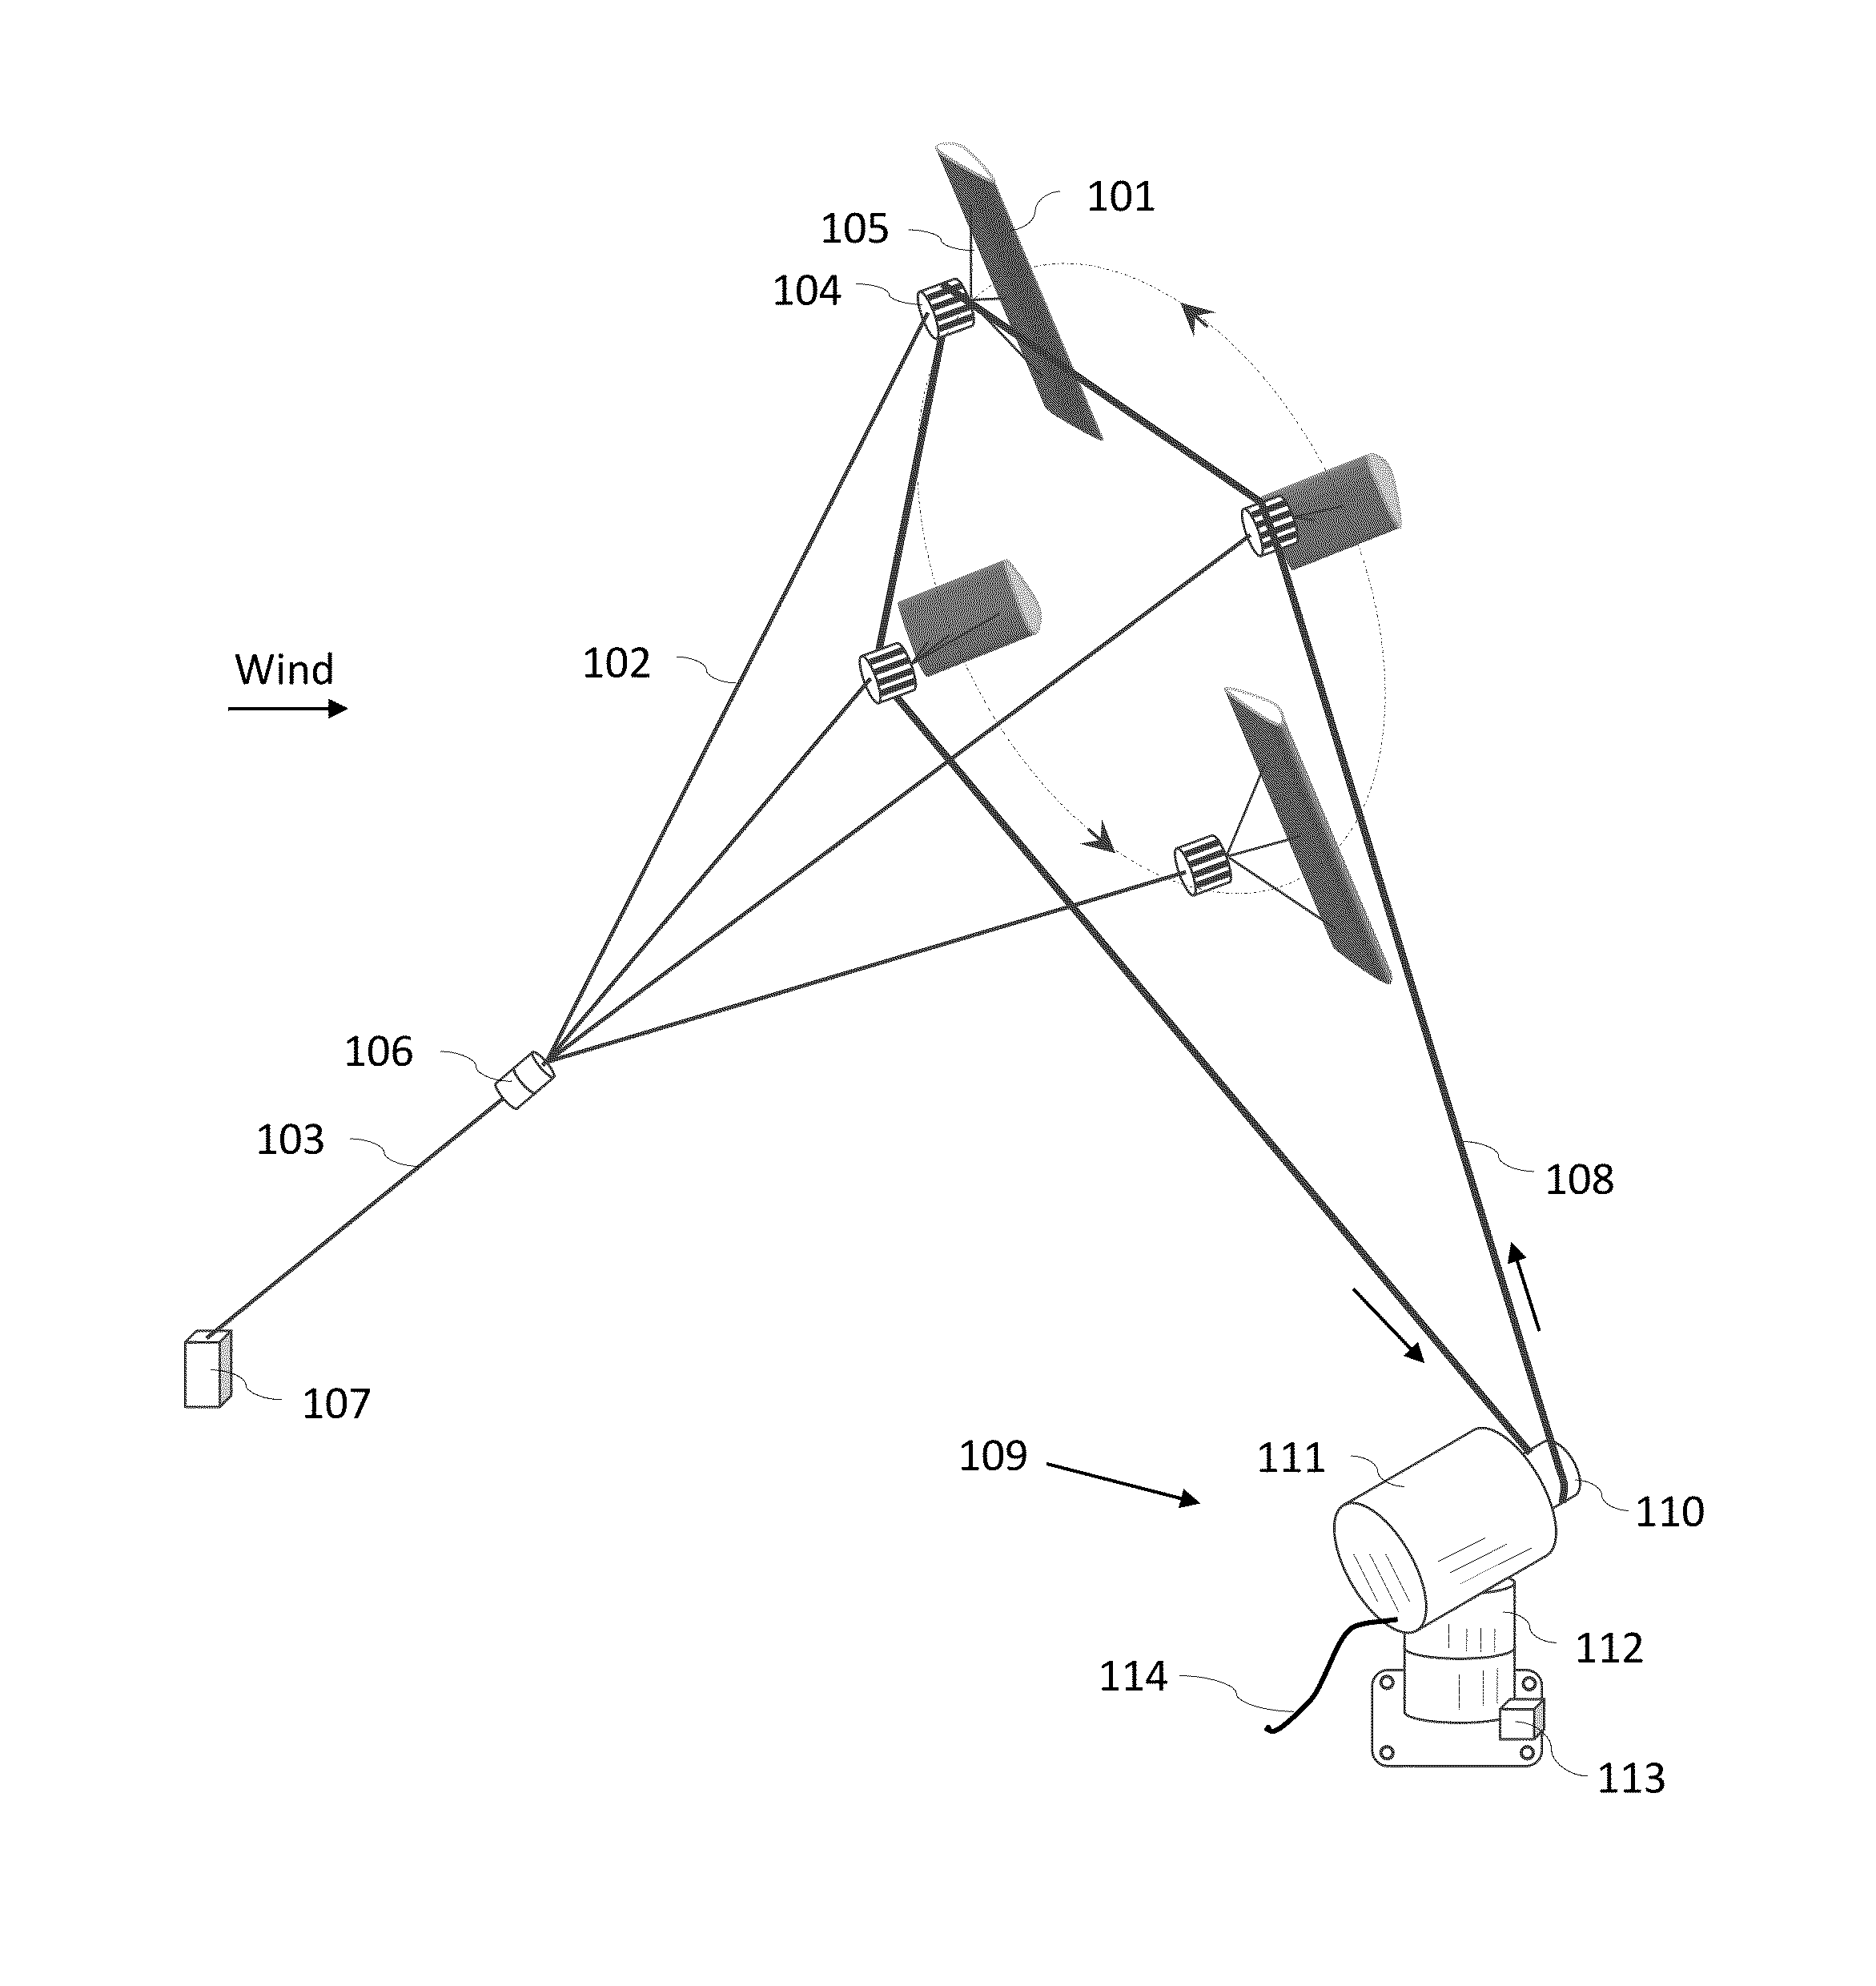 Airborne wind energy conversion system with endless belt and related
systems and methods